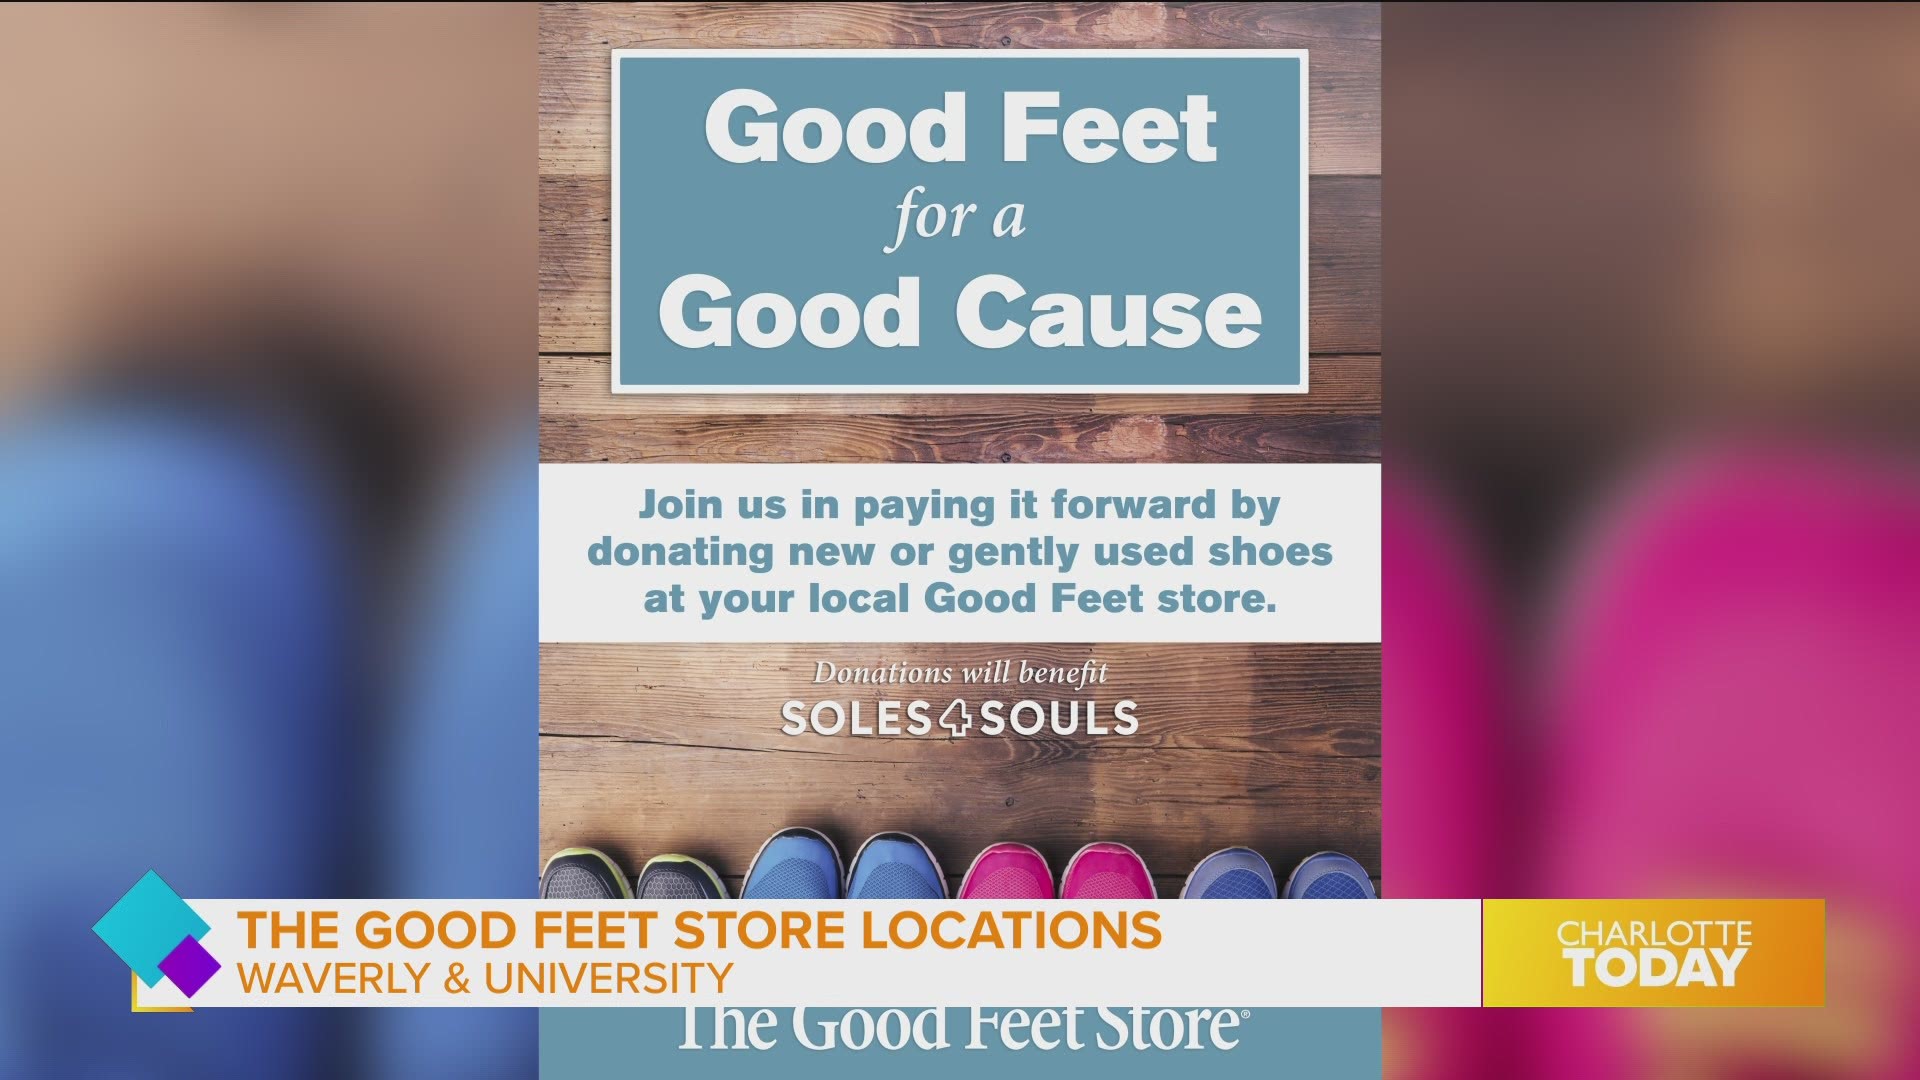 The Good Feet Store is making a positive impact and improving people's lives